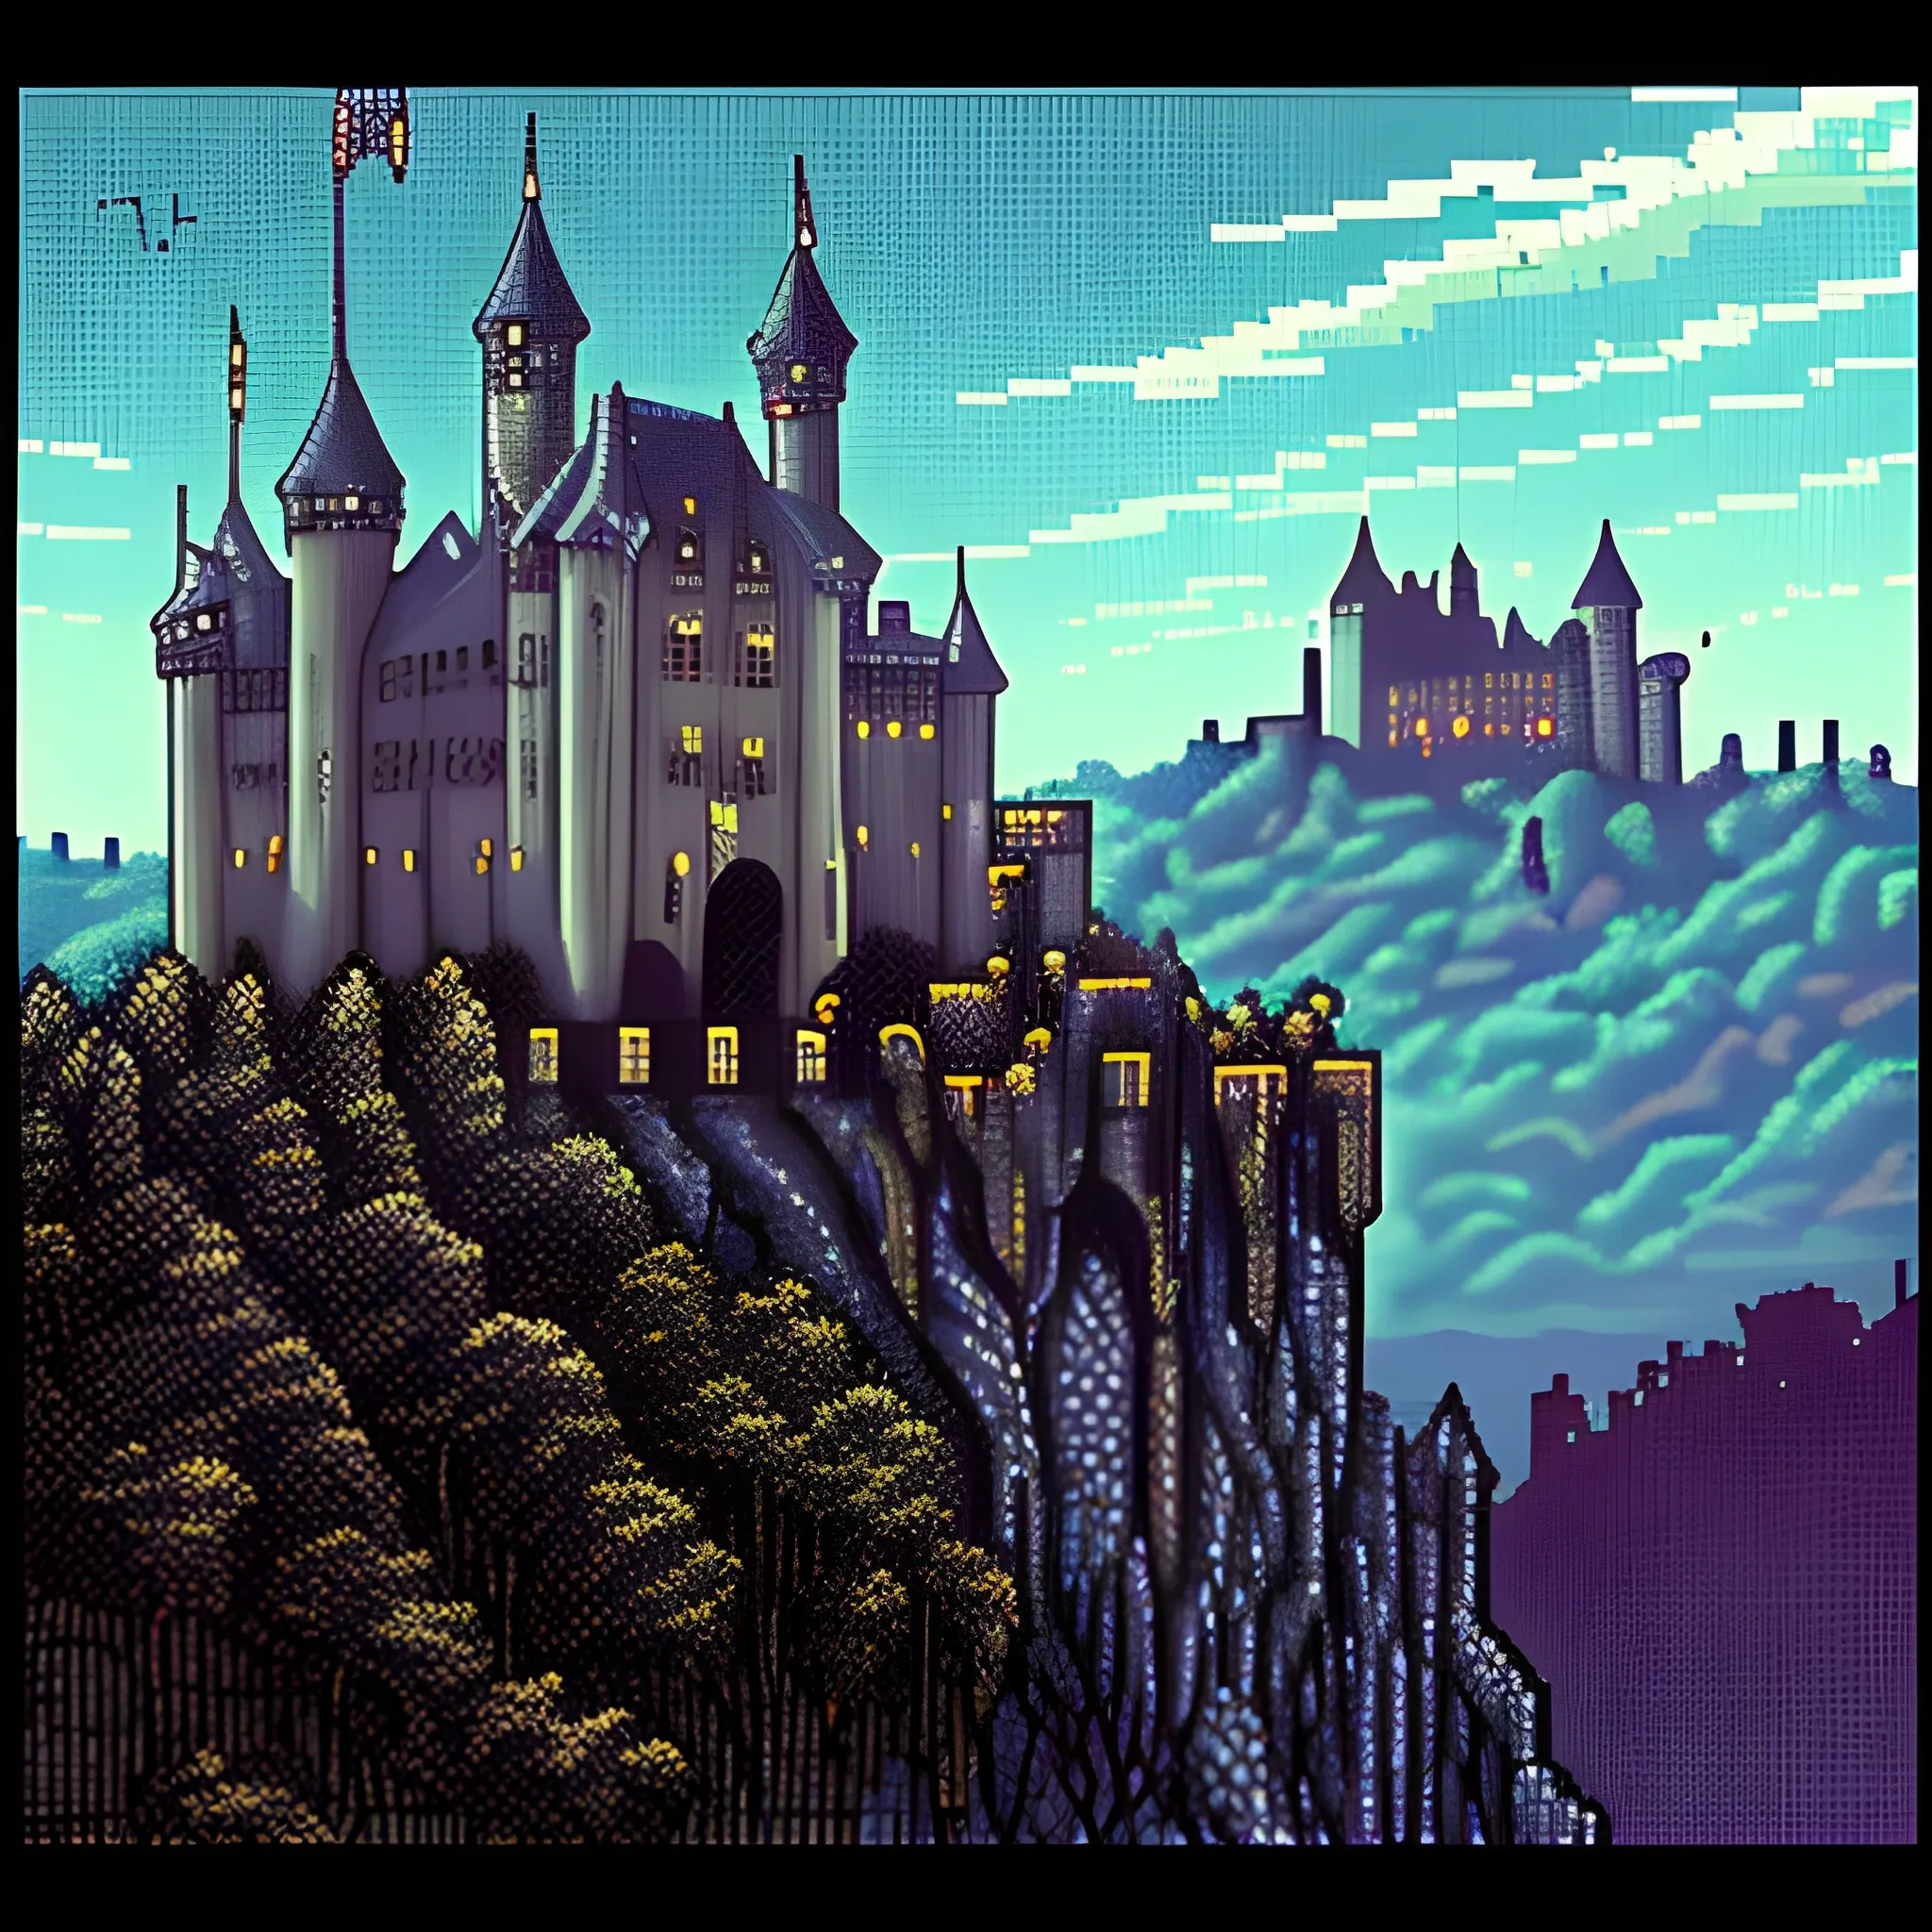 80s dark fantasy pixel knight dying overlooking castle in background

